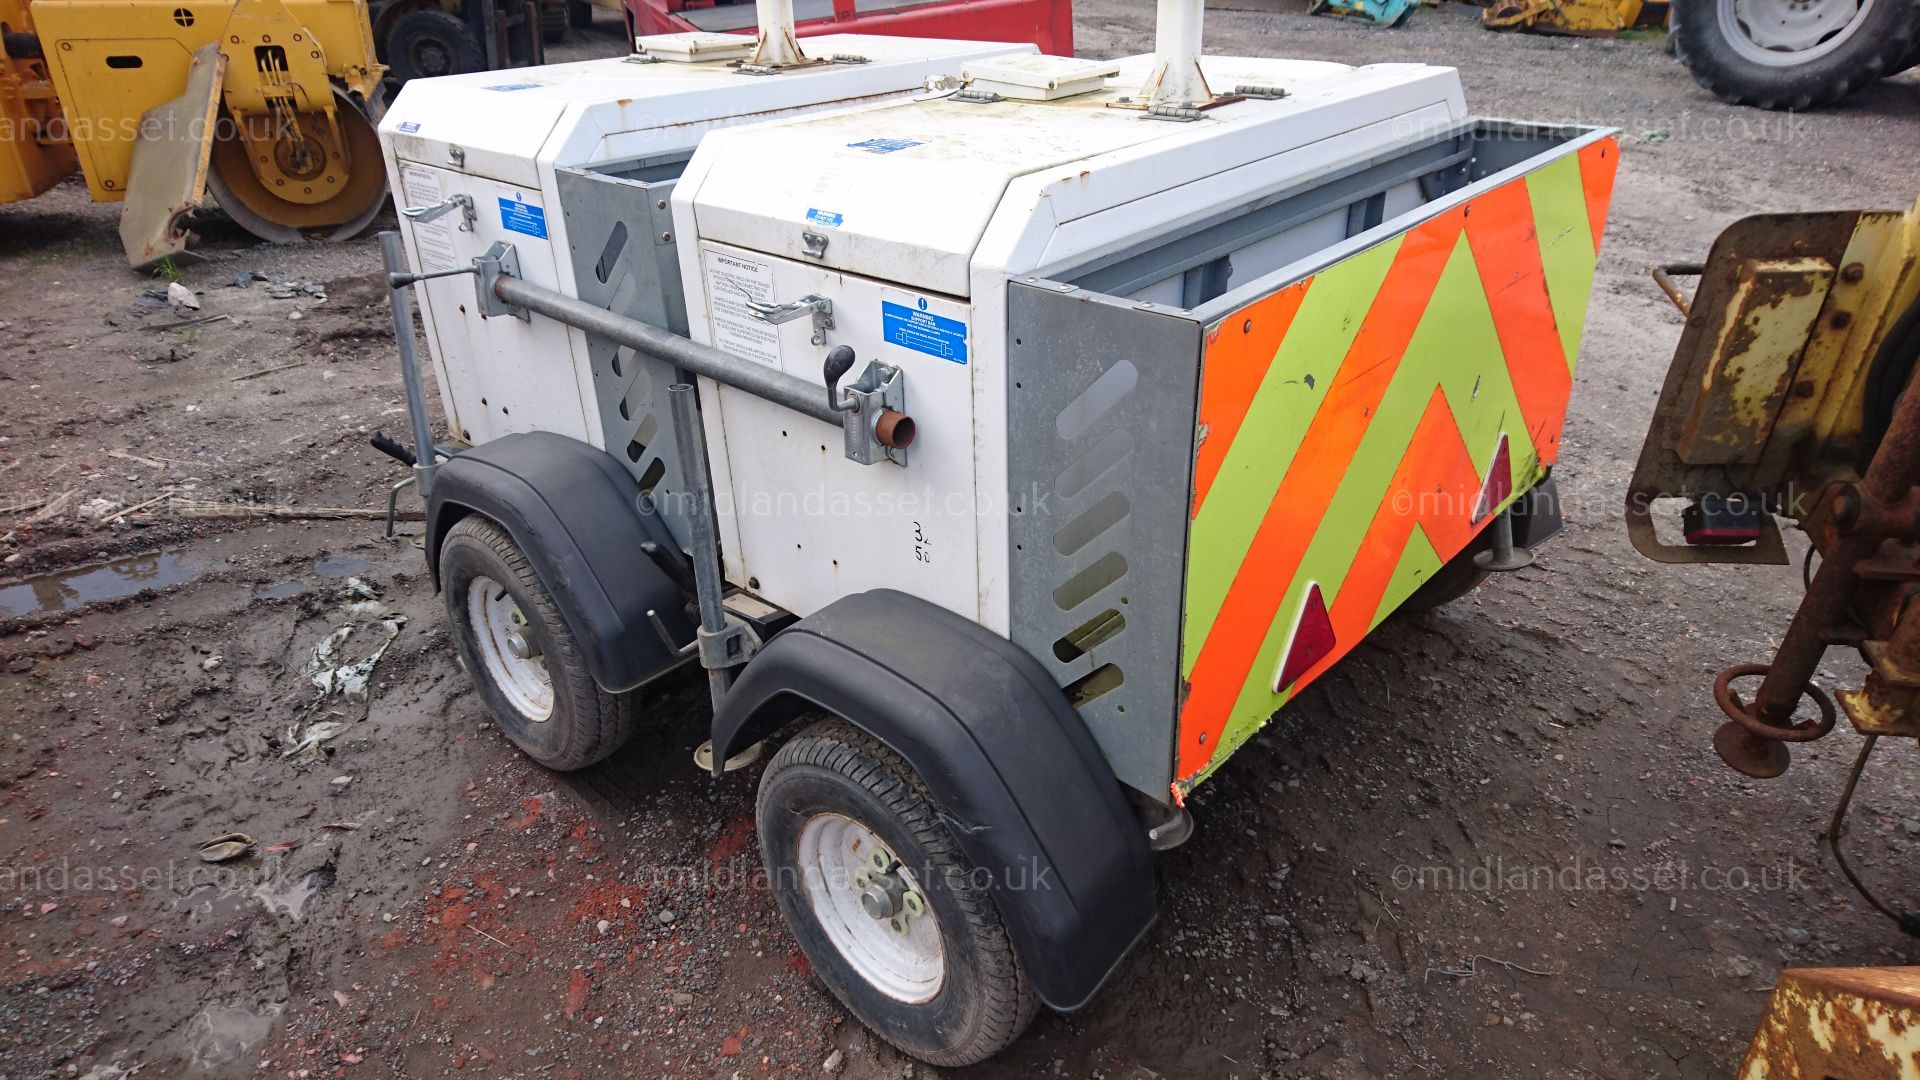 DS - TOWABLE WHITE TRAFFIC LIGHT UNIT   UNTESTED   COLLECTION FROM PILSLEY - Image 5 of 6